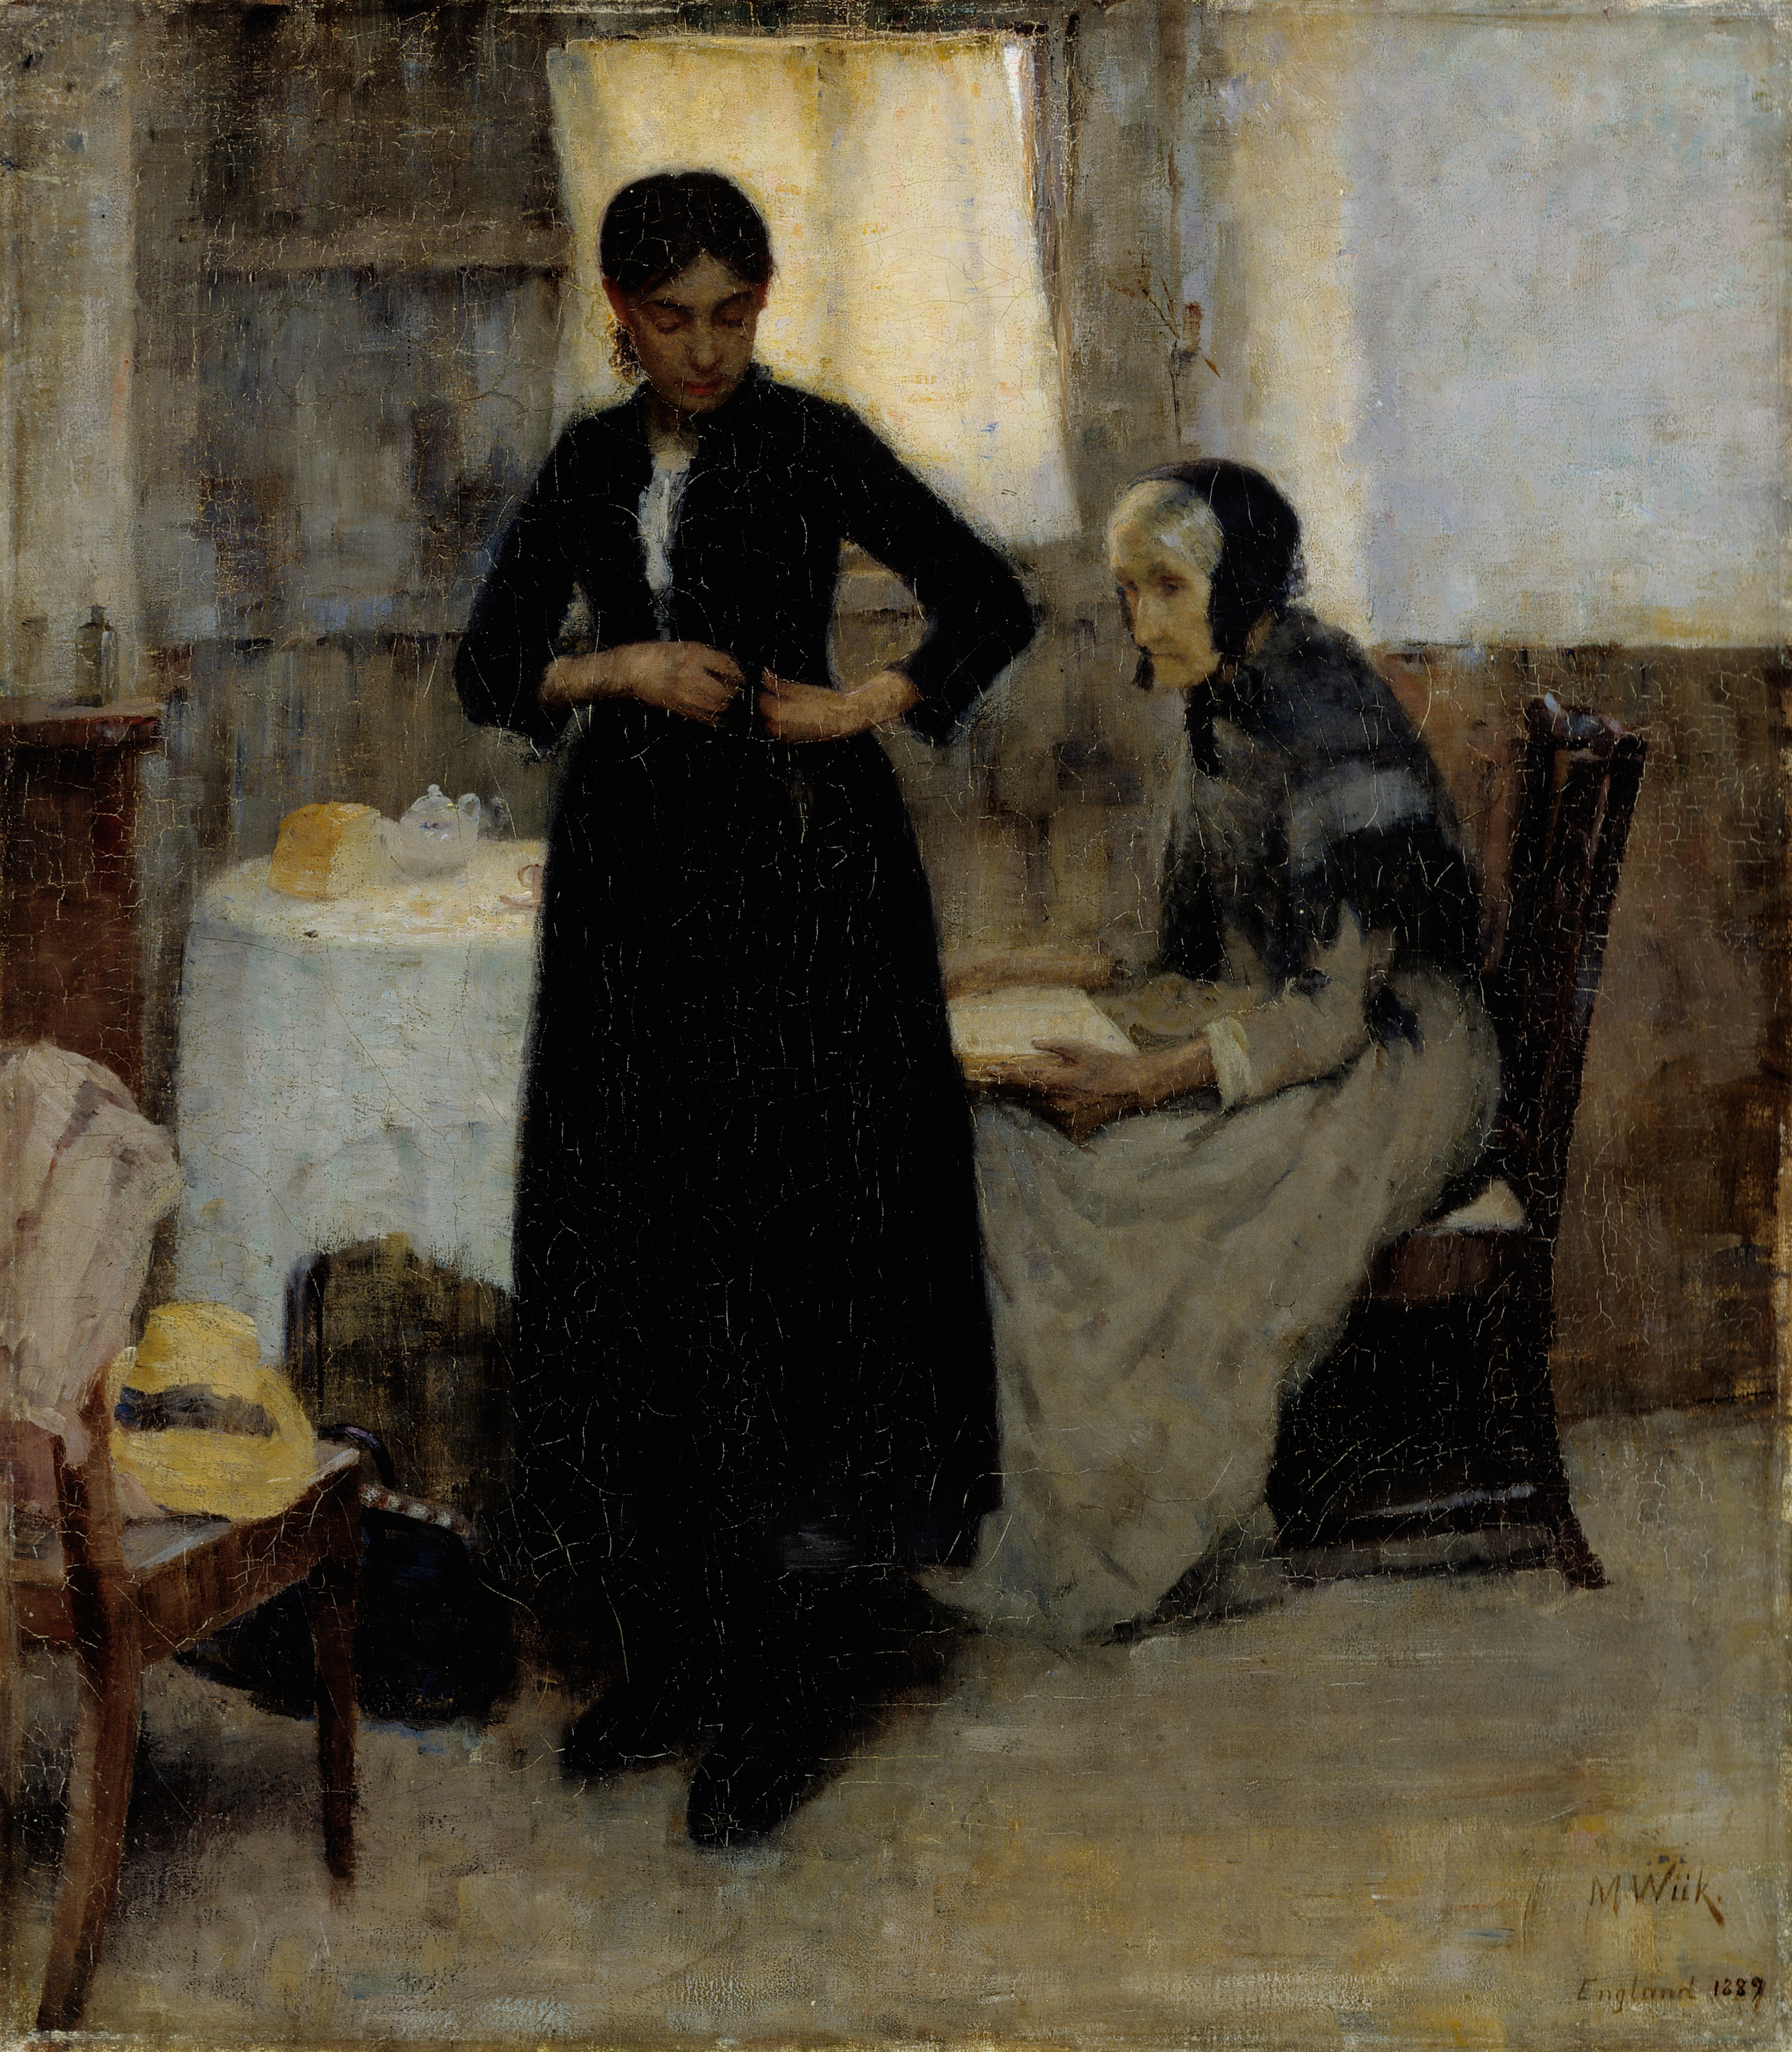 Out into the World by Maria Wiik - 1889 - 69 x 61 cm Europeana